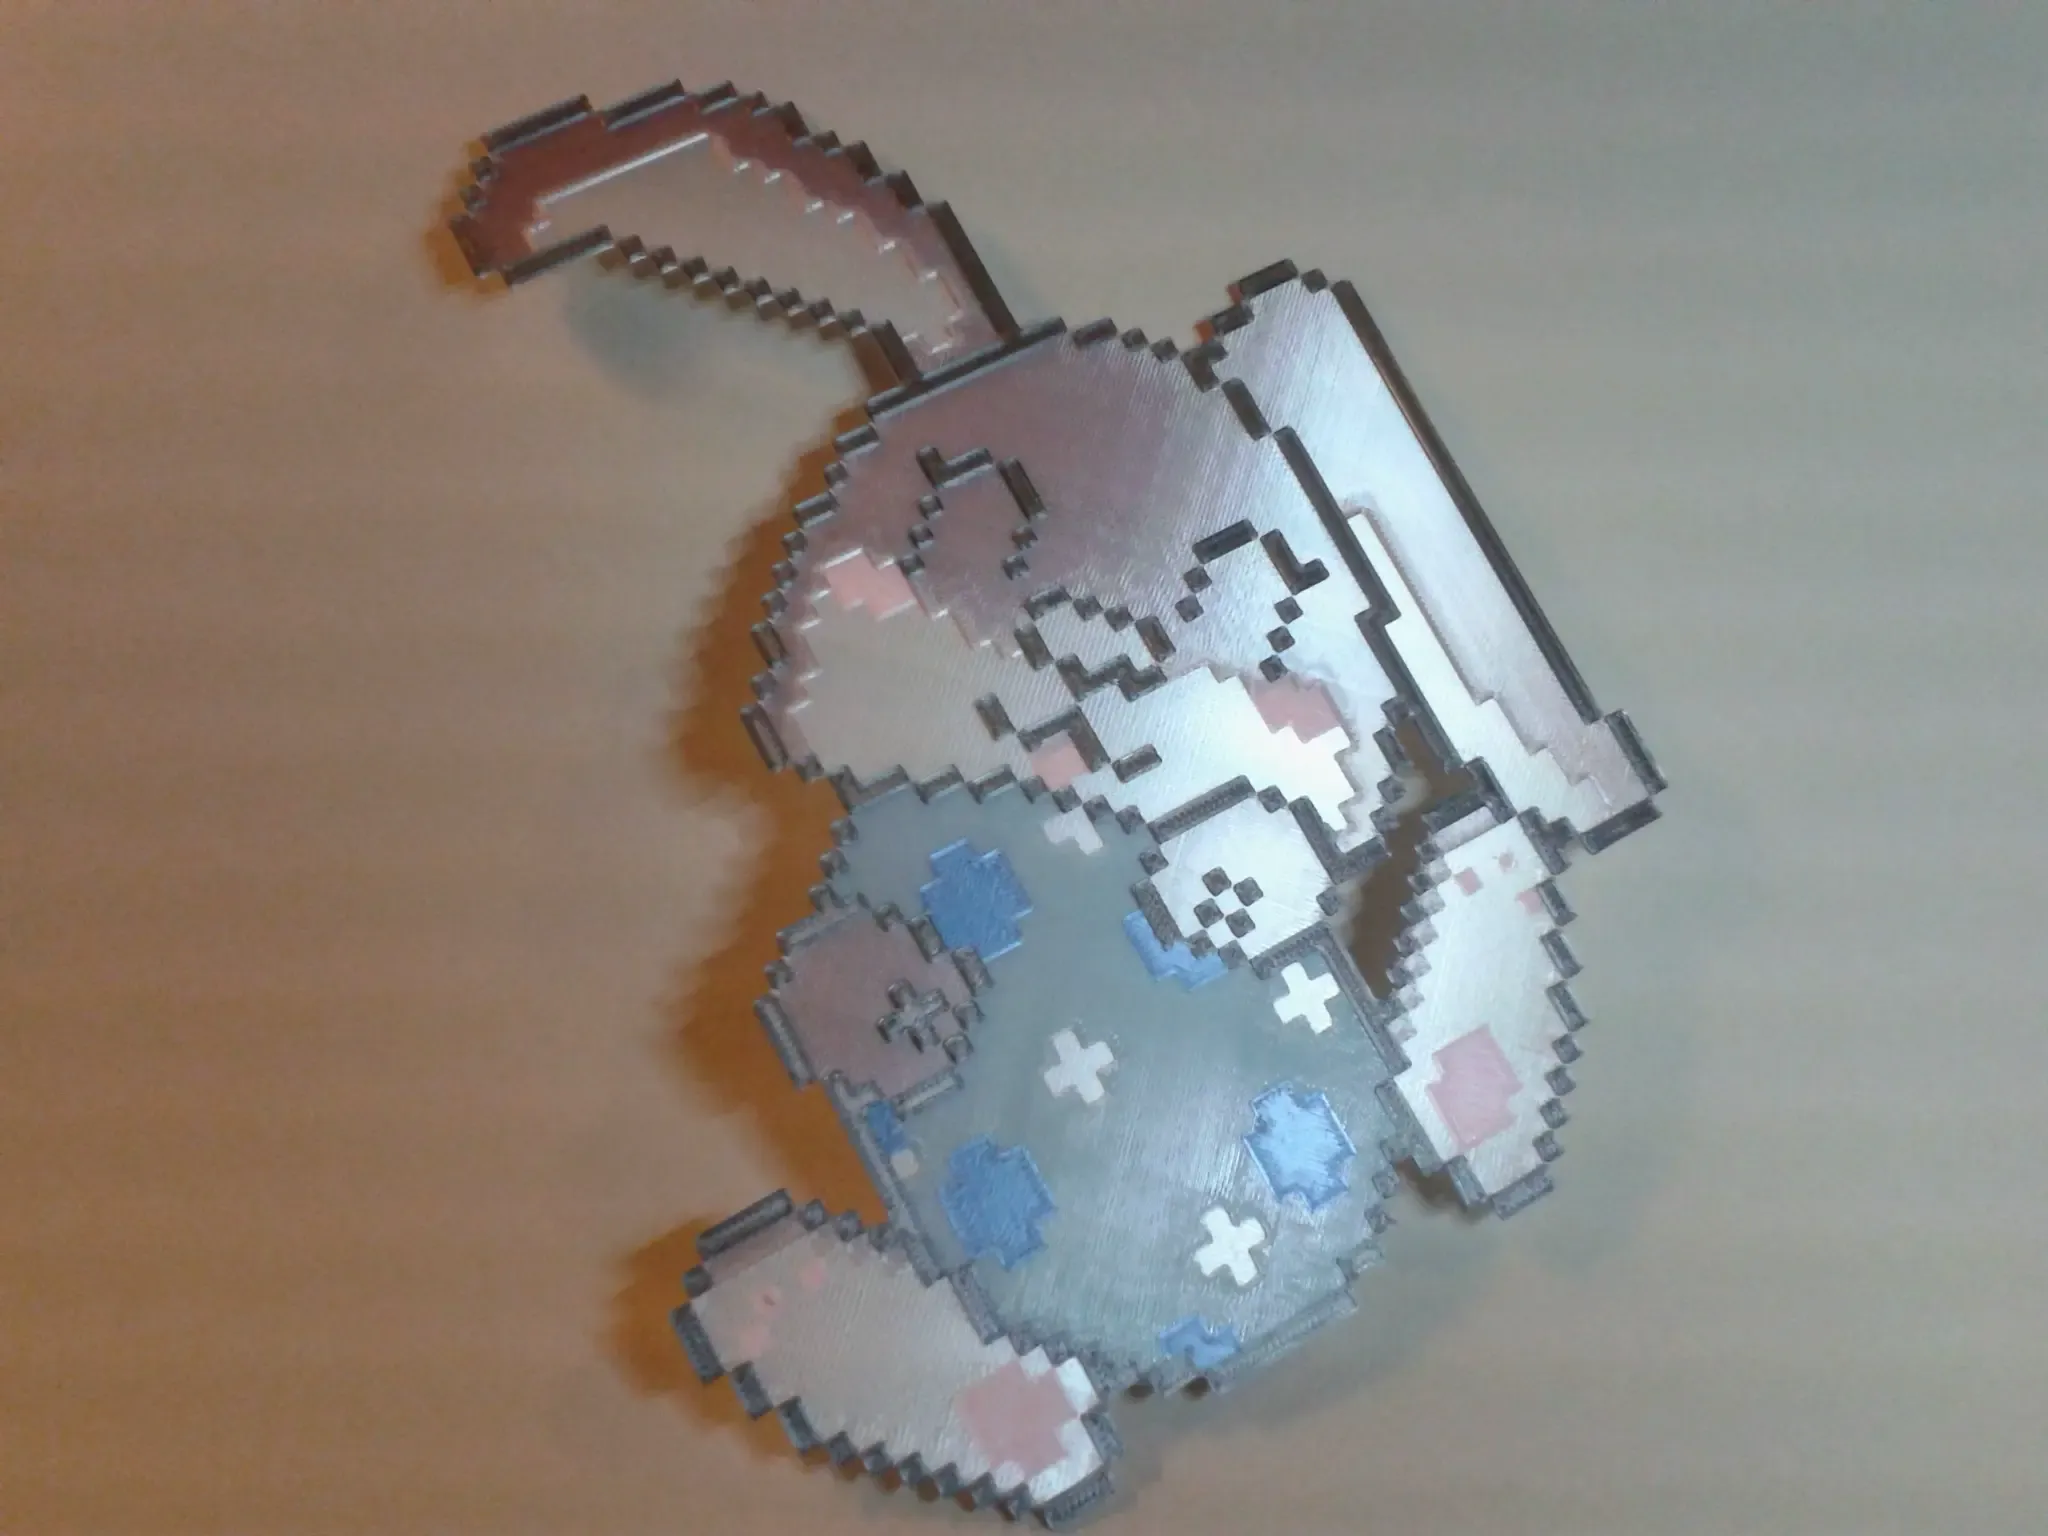 Happy Easter Bunny, with 5 filament changes.